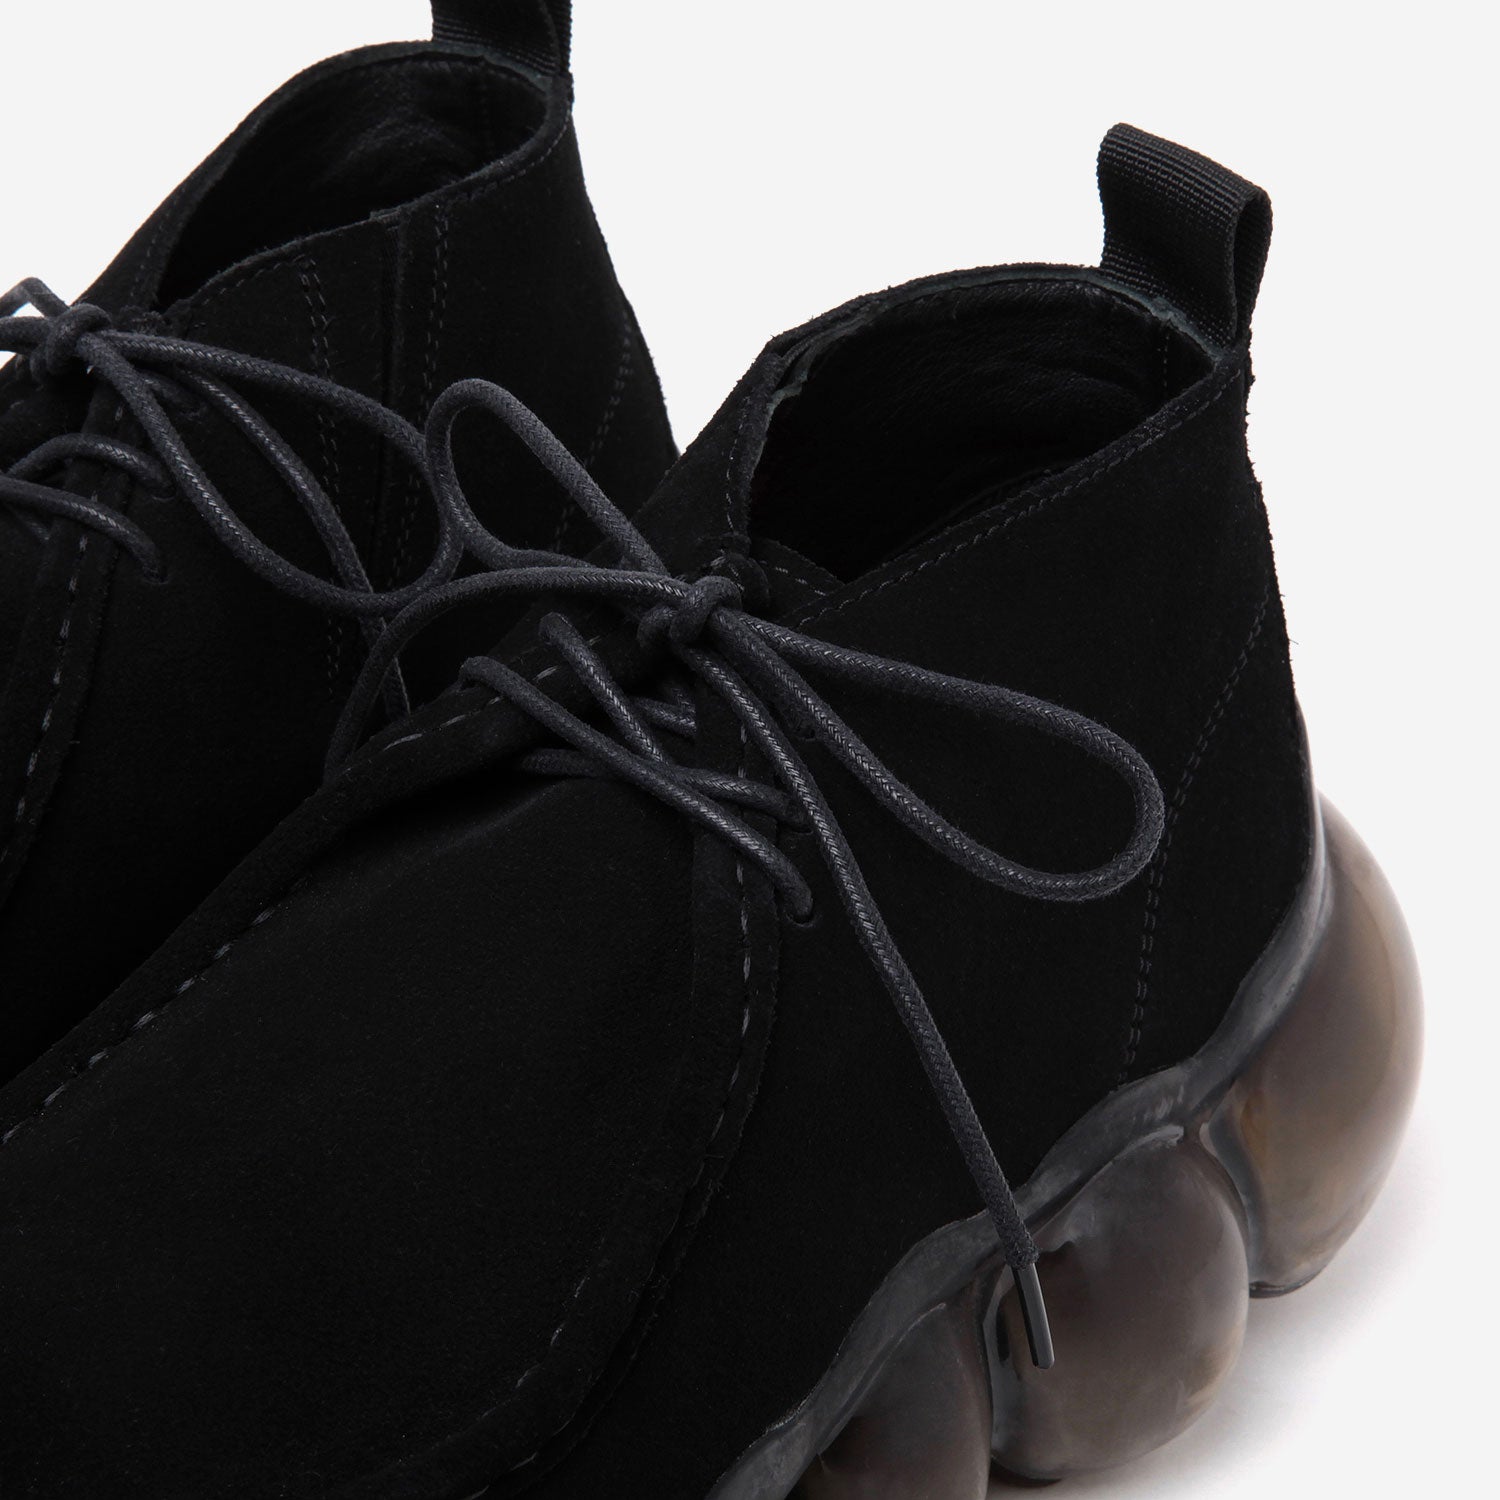 th × Grounds / black – th products